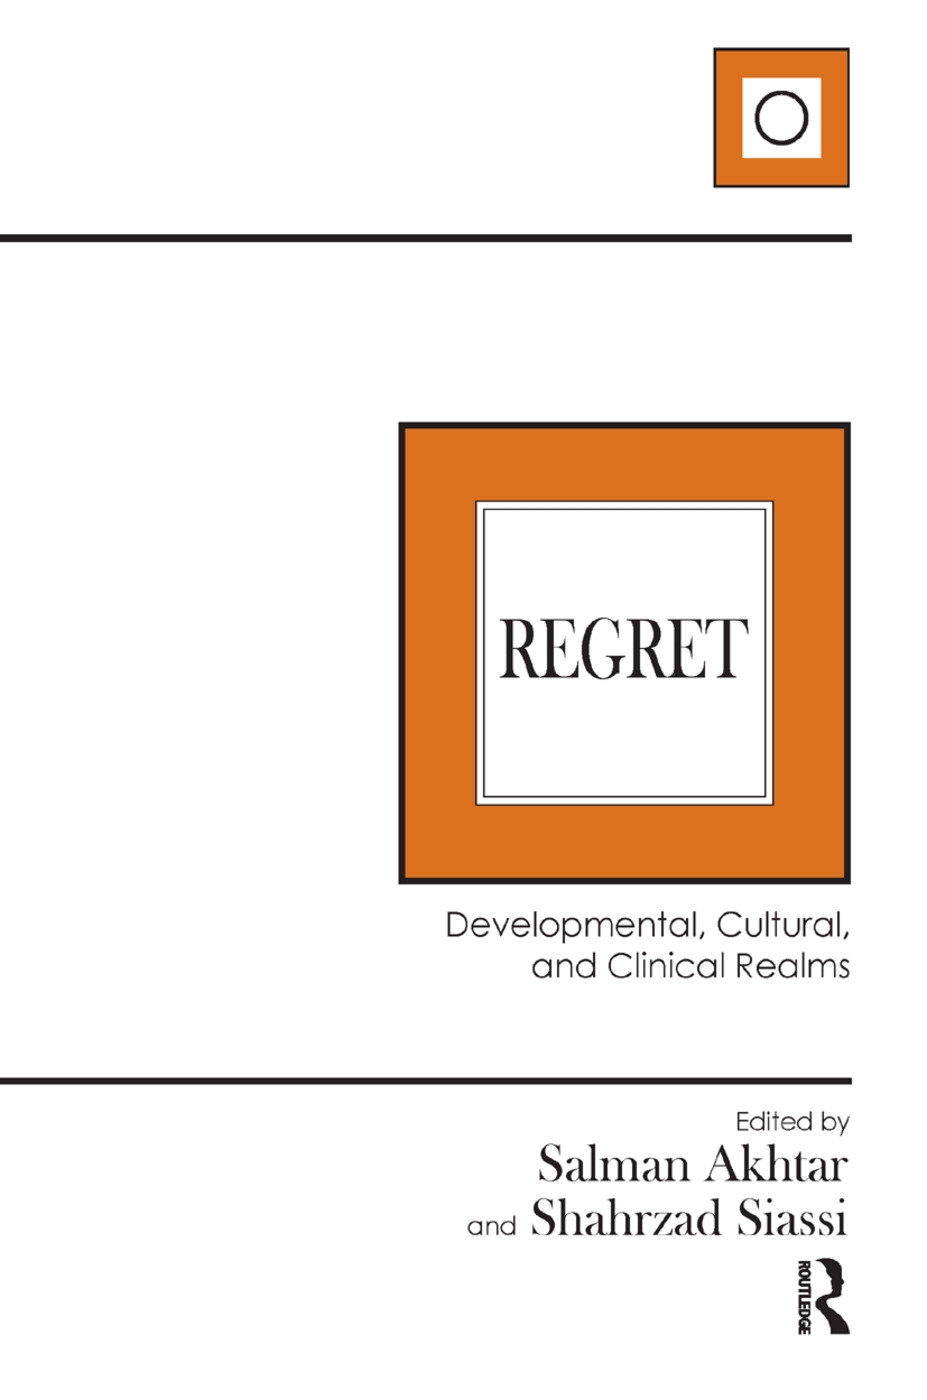 Regret: Developmental, Cultural, and Clinical Realms